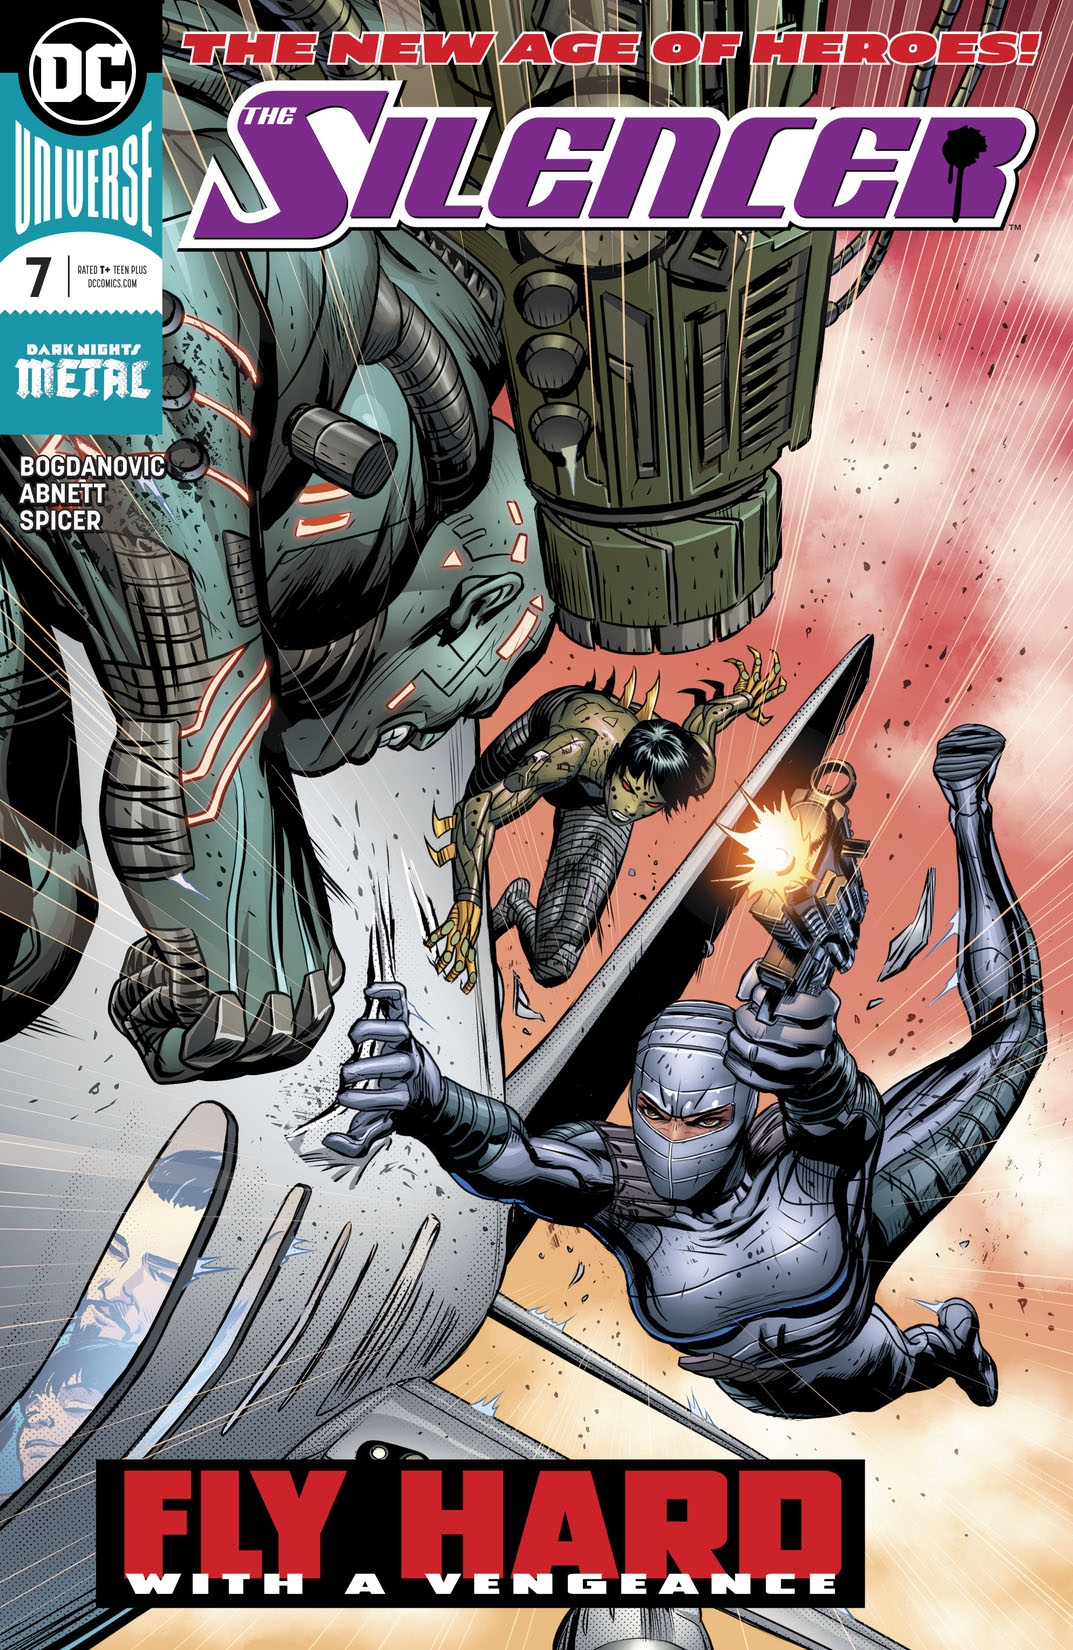 The Silencer #7 preview images